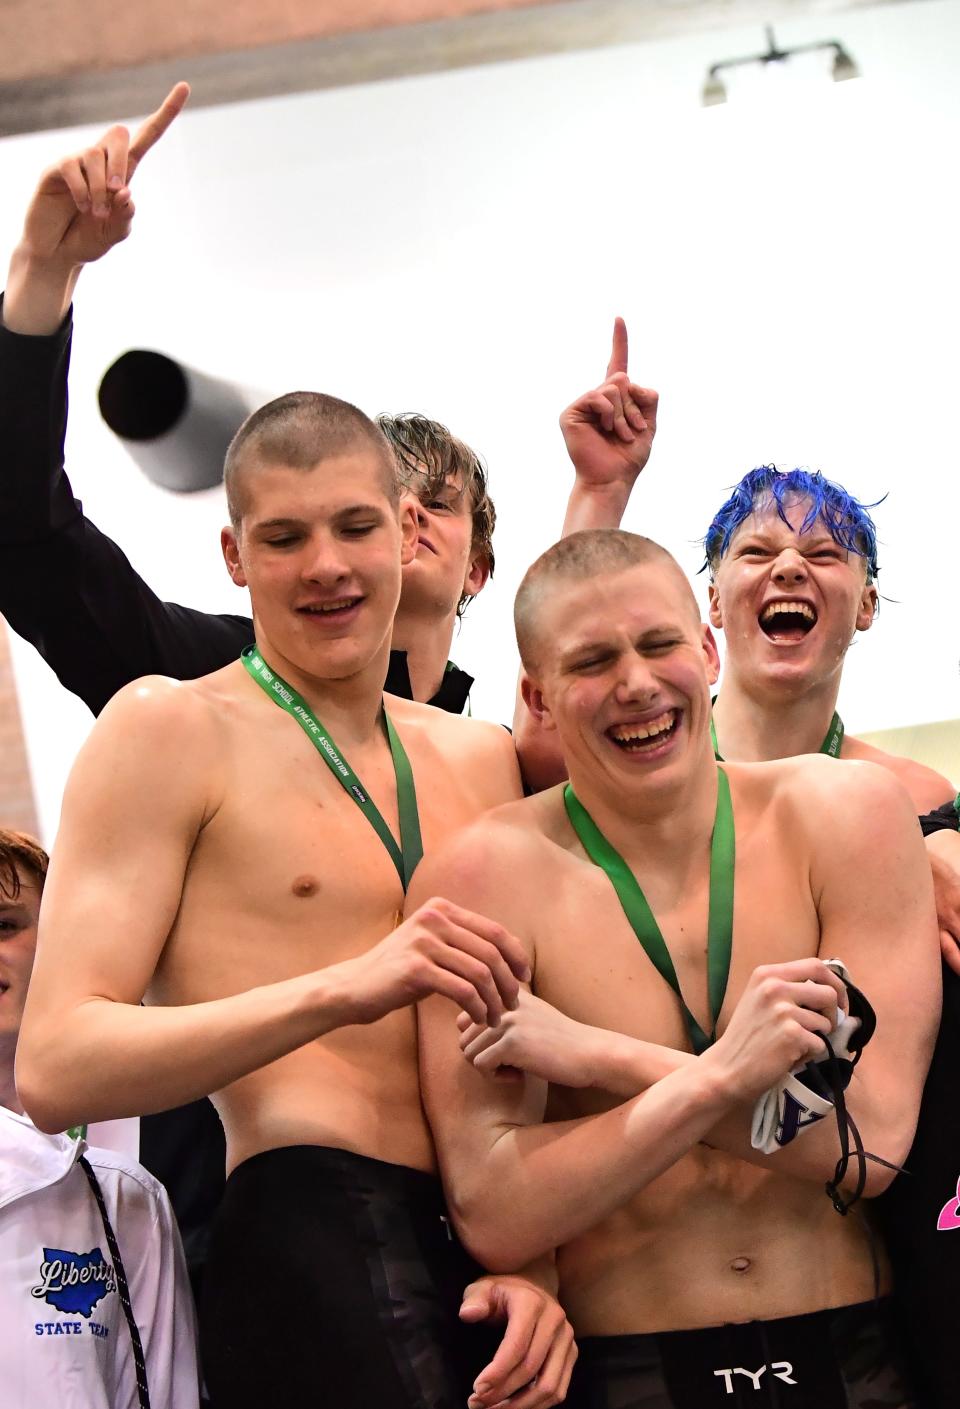 The team of Thackston McMullan, Max Ward, Alex Ingram and Kyle Silverstain won first place in the boys 200-yard freestyle relay for St. Xavier at the 2023 Division I Ohio High School Athletic Association Swimming and Diving Championships, Feb. 25, 2023.